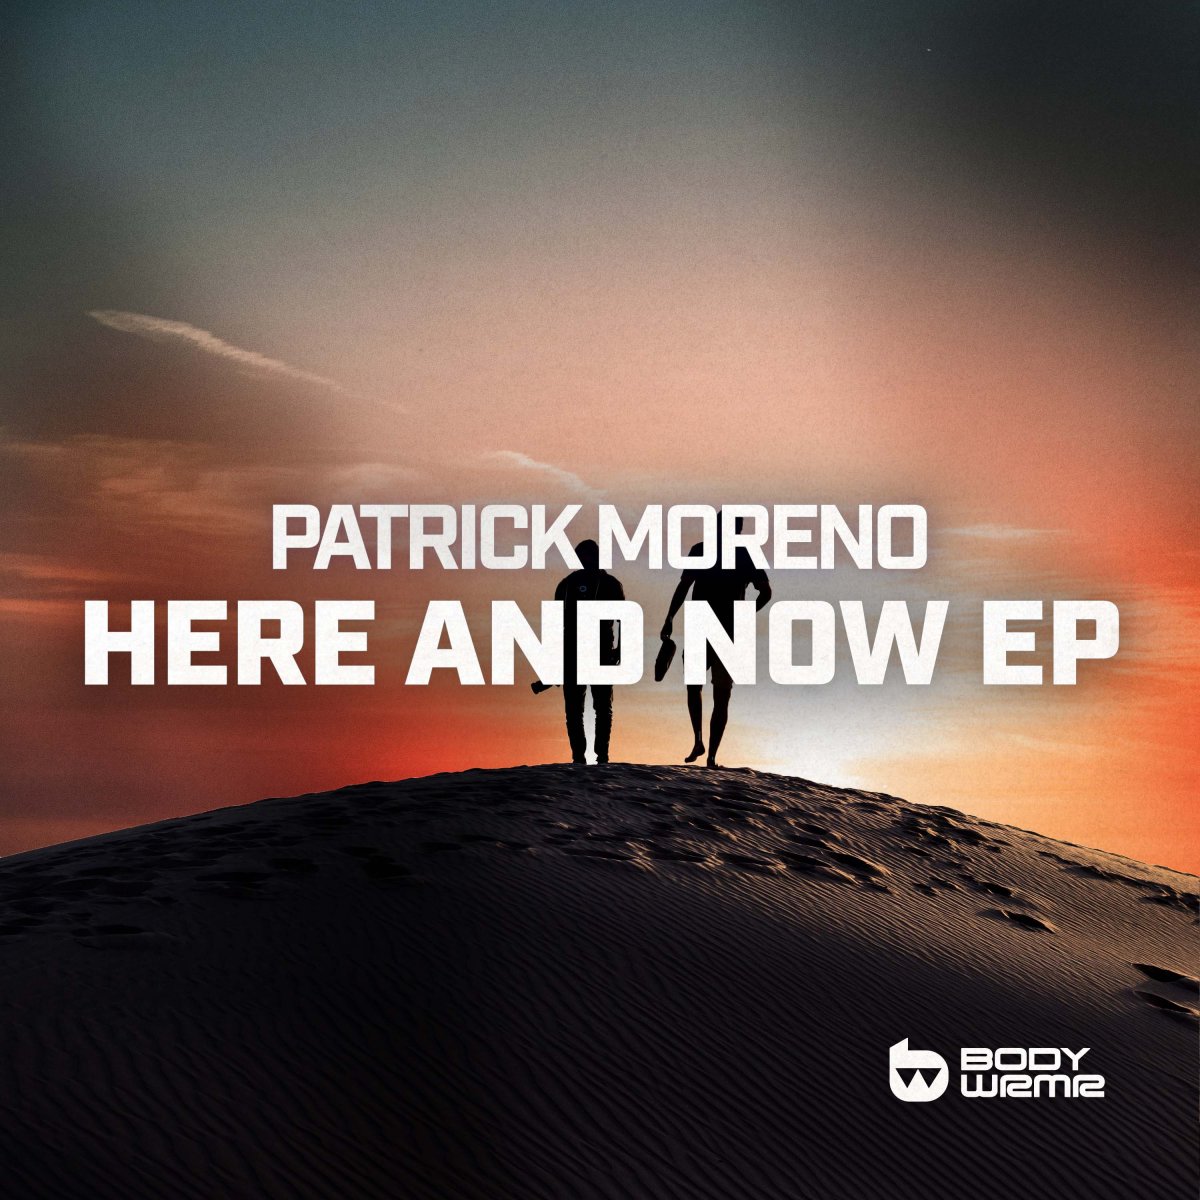 Here And Now EP - Patrick Moreno⁠ 